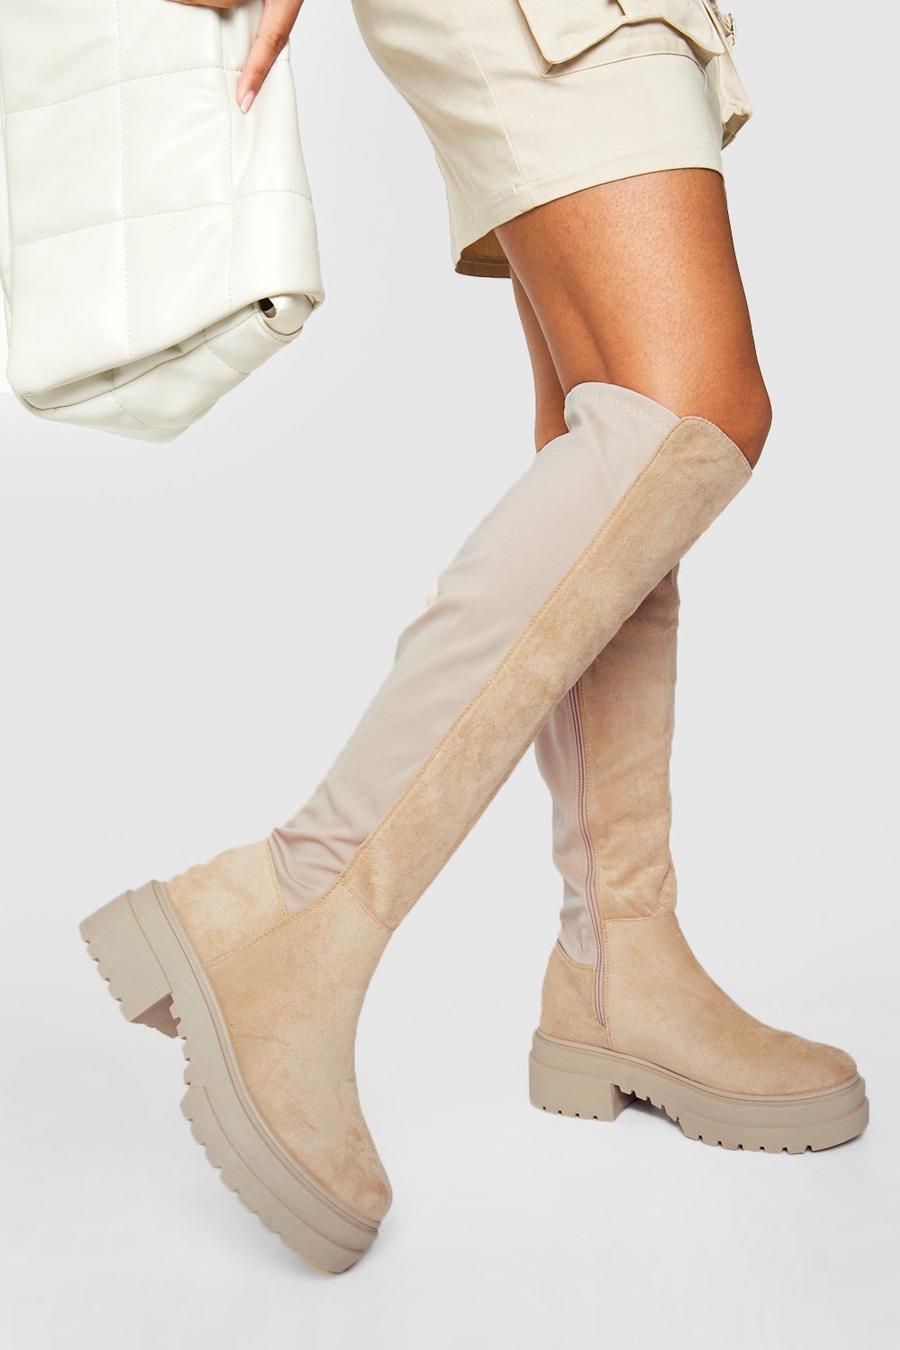 ASOS Damen Schuhe Stiefel Hohe Stiefel Rooshi over the knee stretch boots in cream 